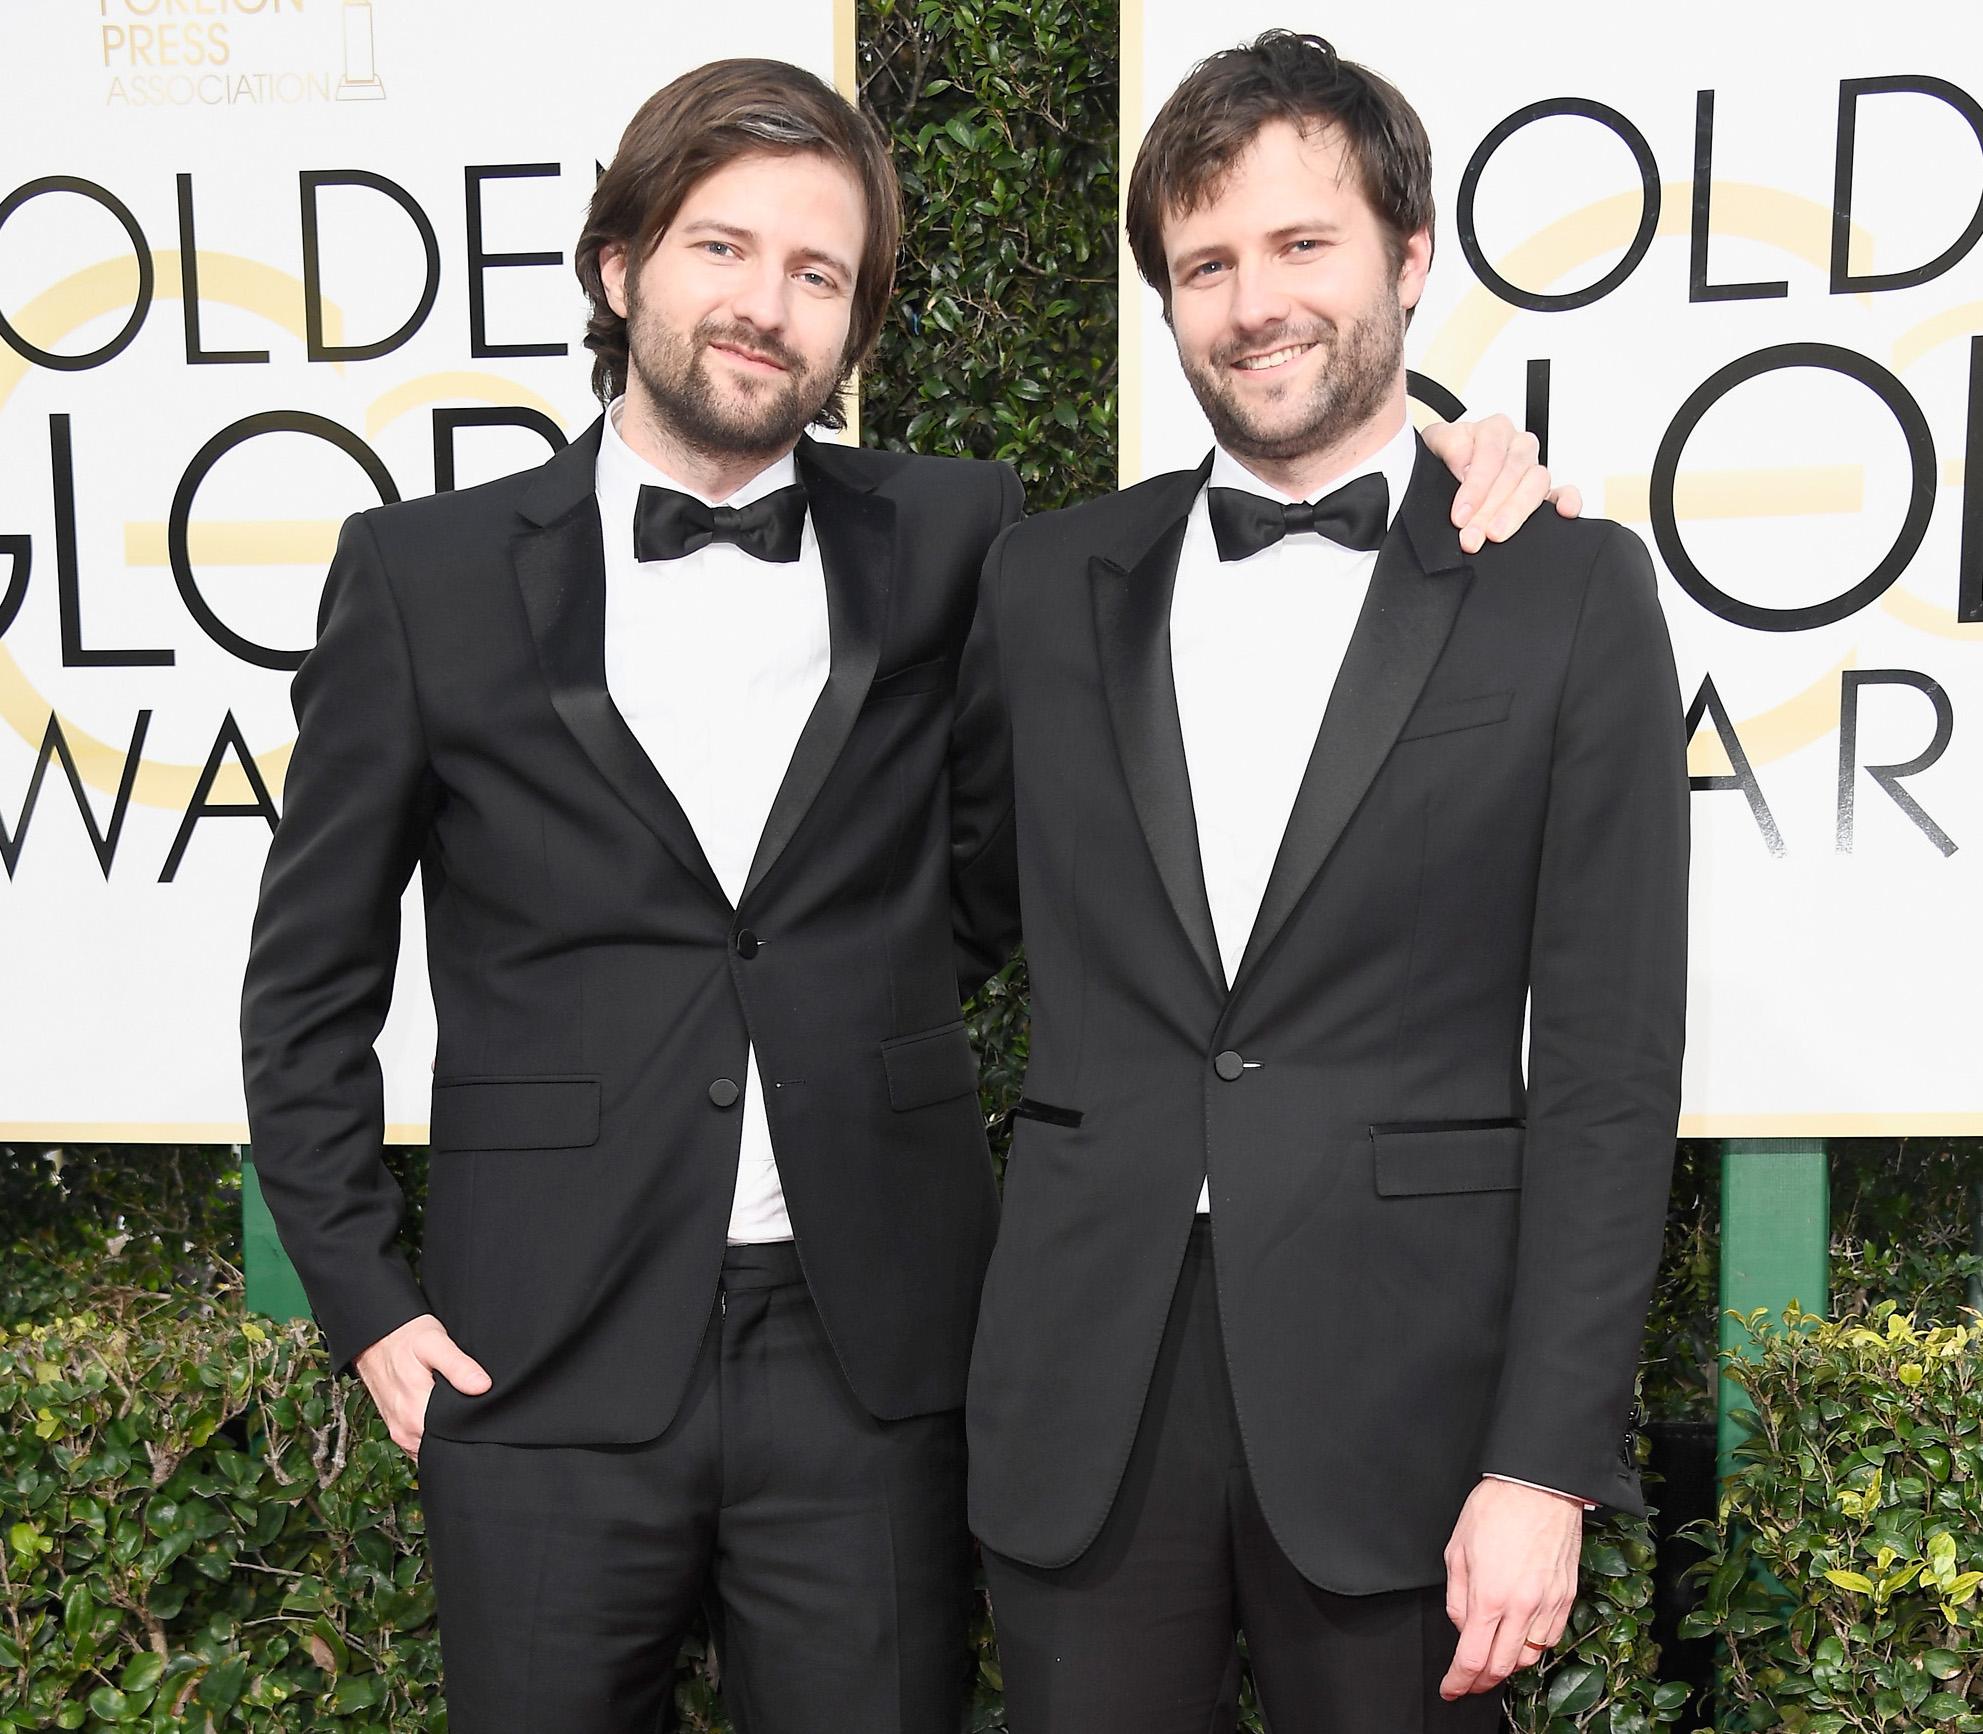 Stranger Things writers/producers Matt and Ross Duffer attend the 74th annual Golden Globe awards, January 2017